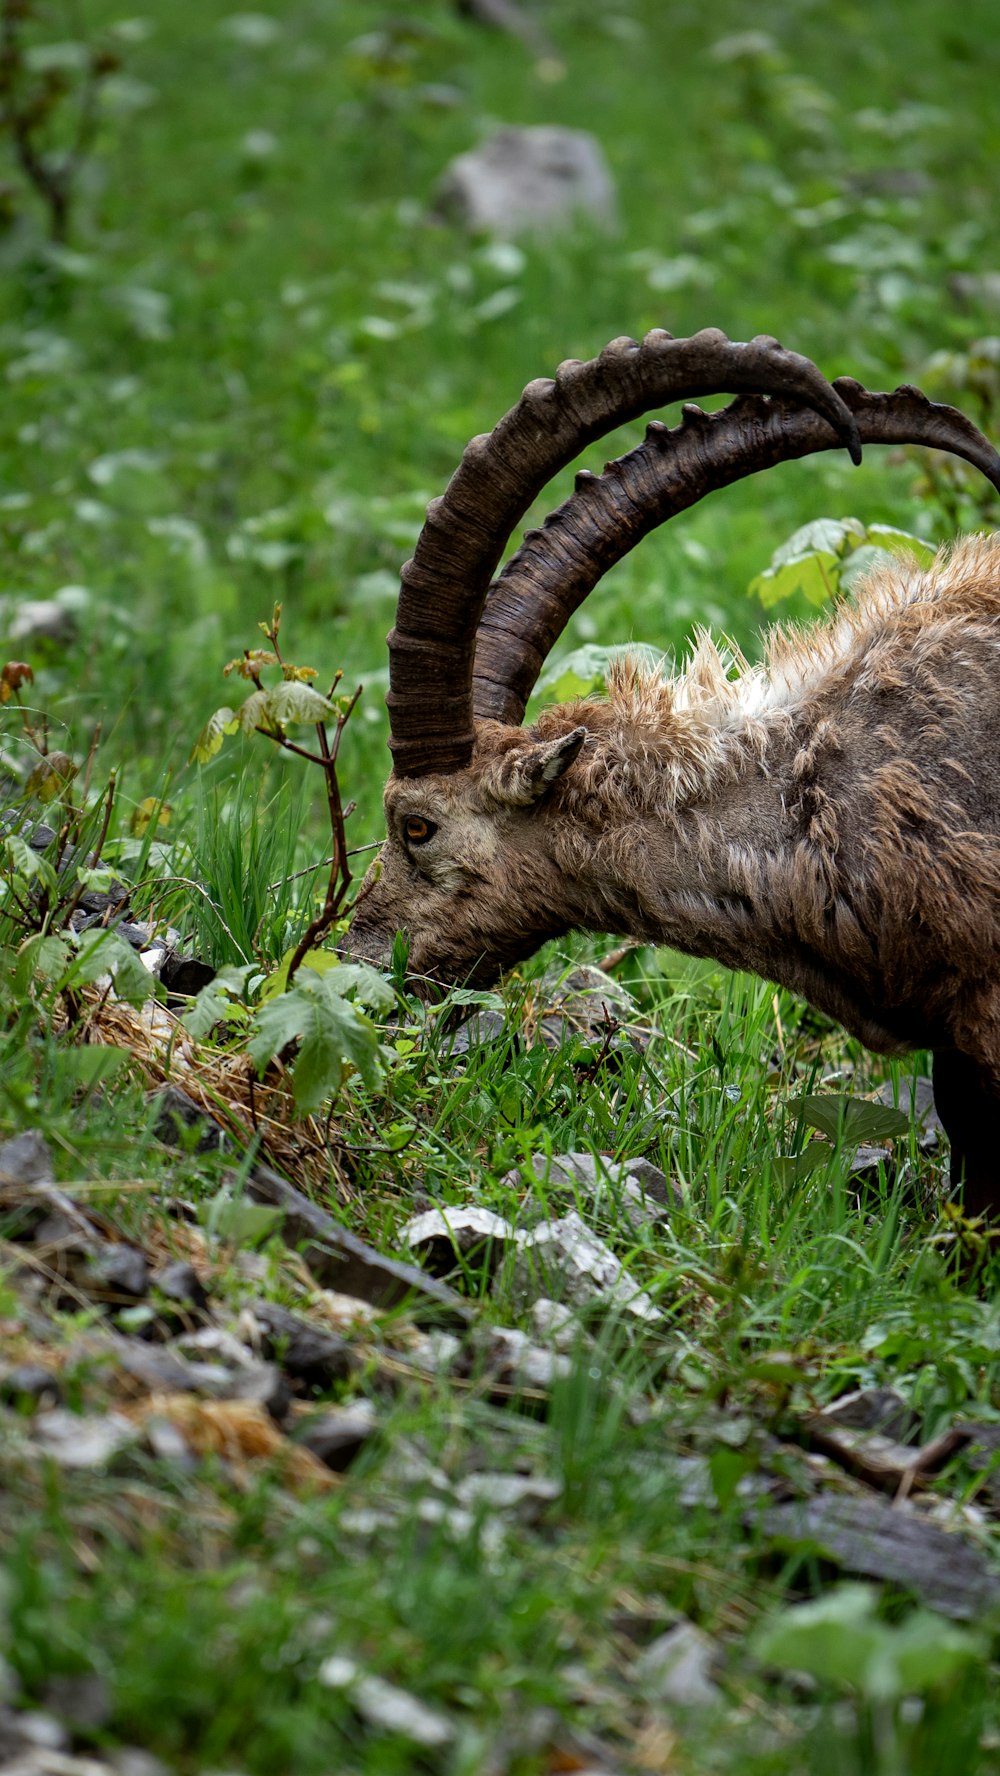 a goat with long horns grazing in the grass